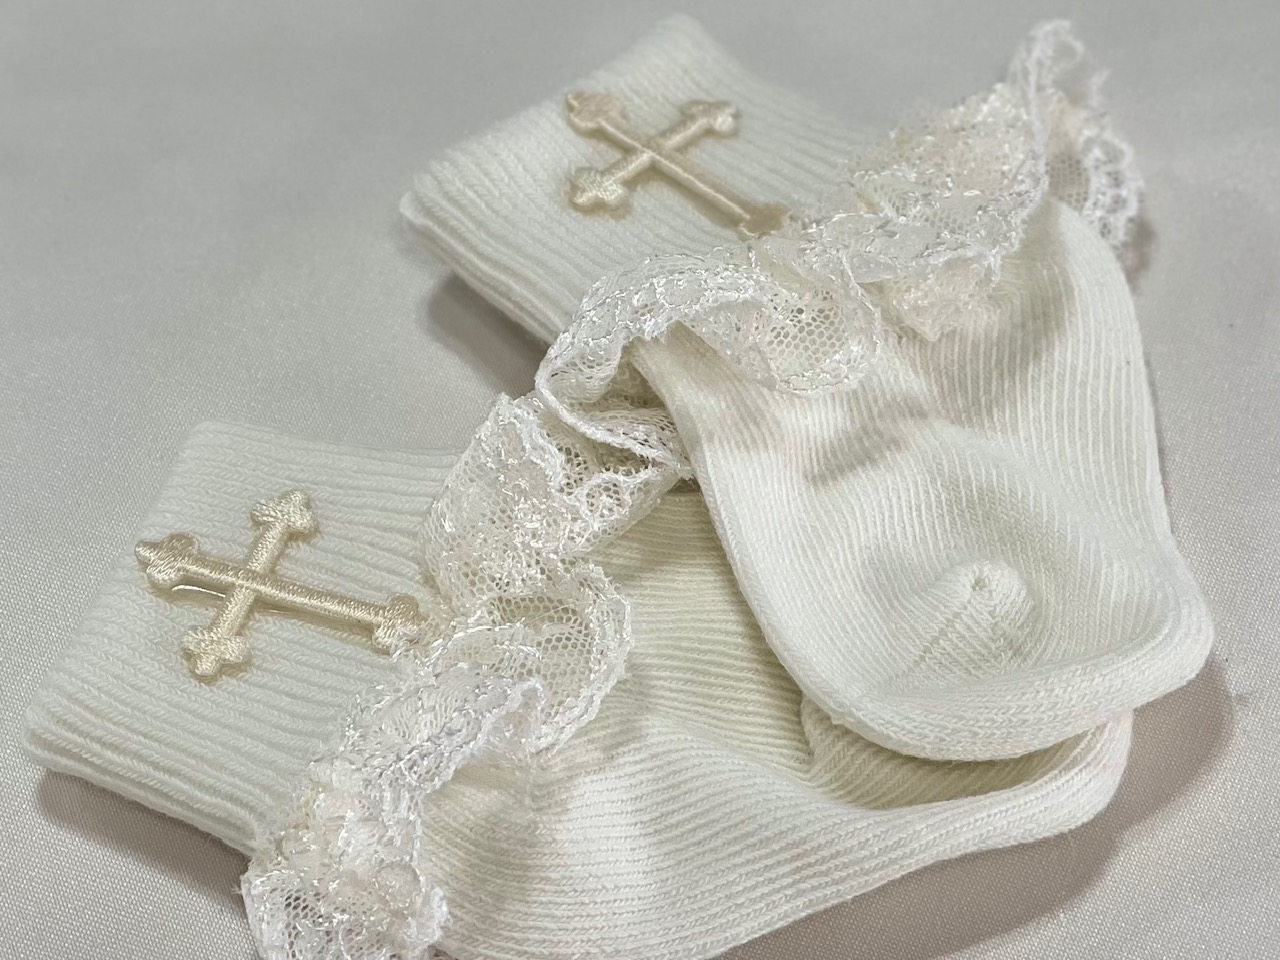 Baby Ivory Socks with Lace Ruffle